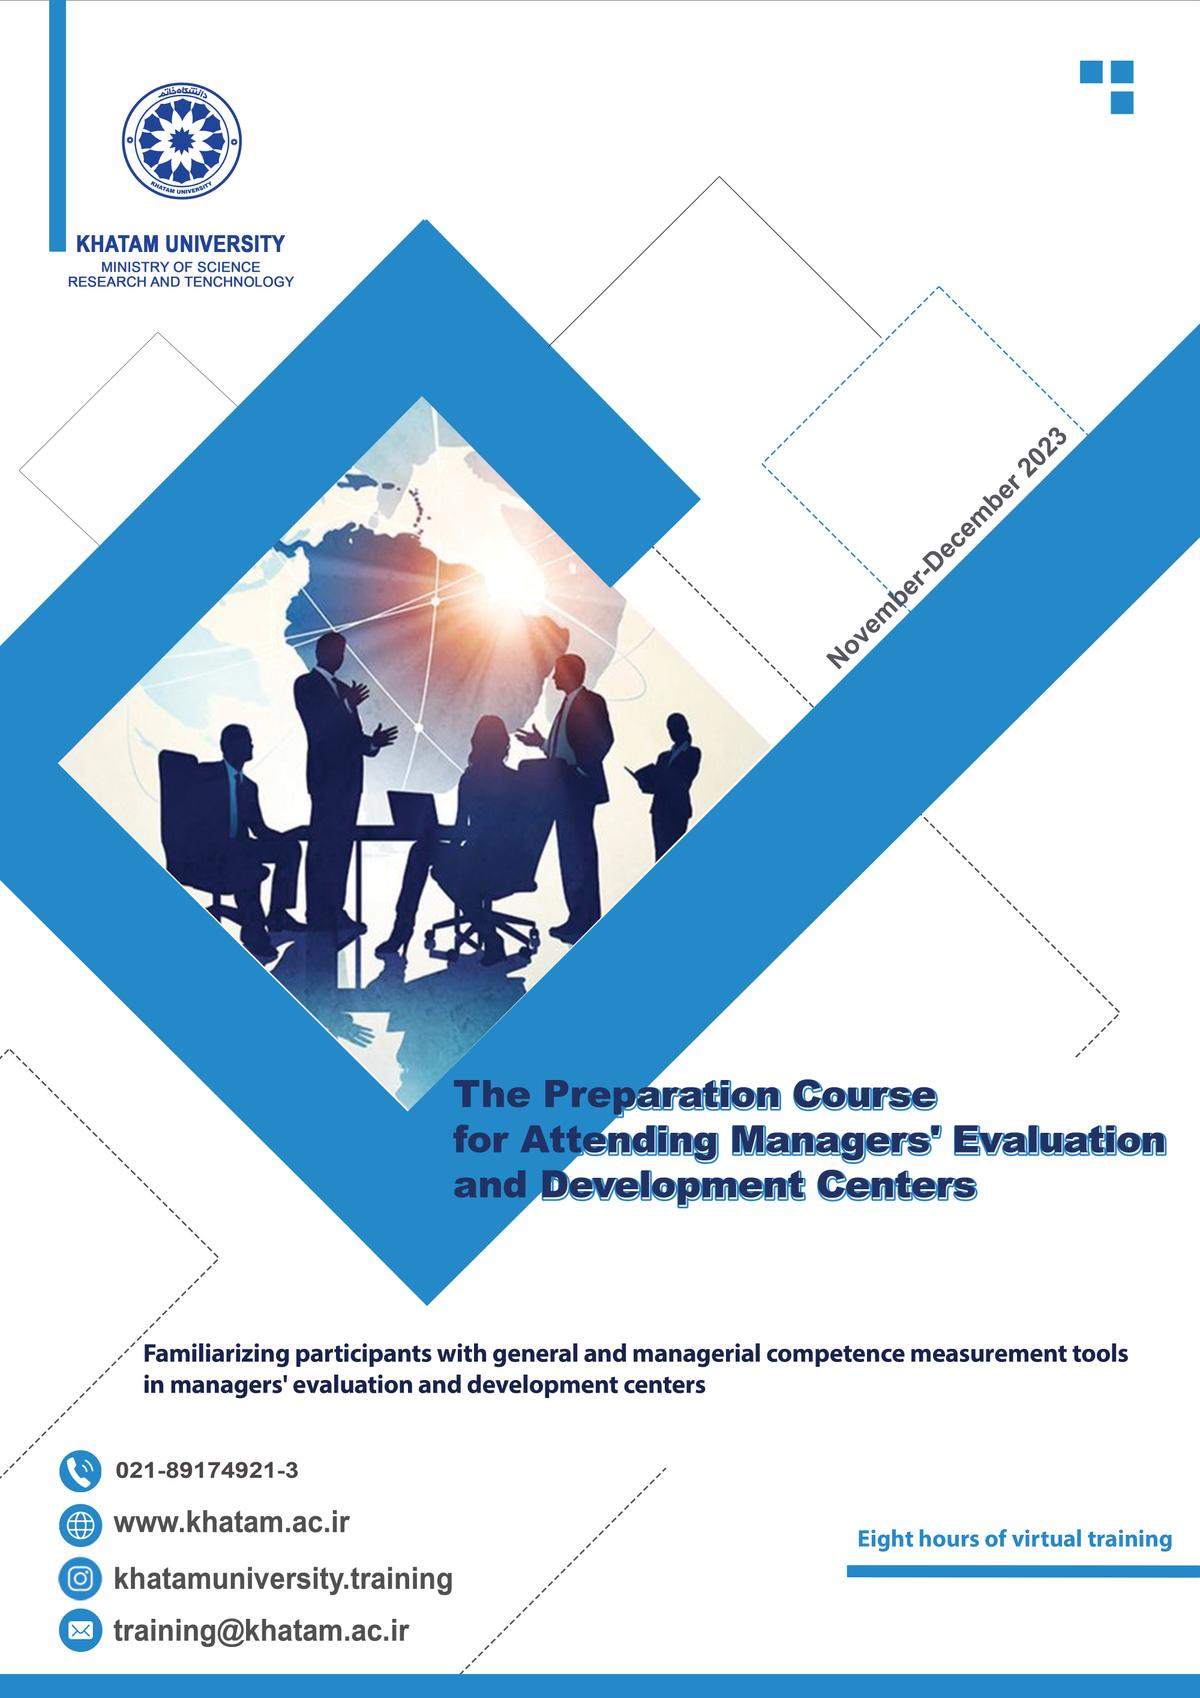 Course for Attending Managers' Evaluation and Development Centers